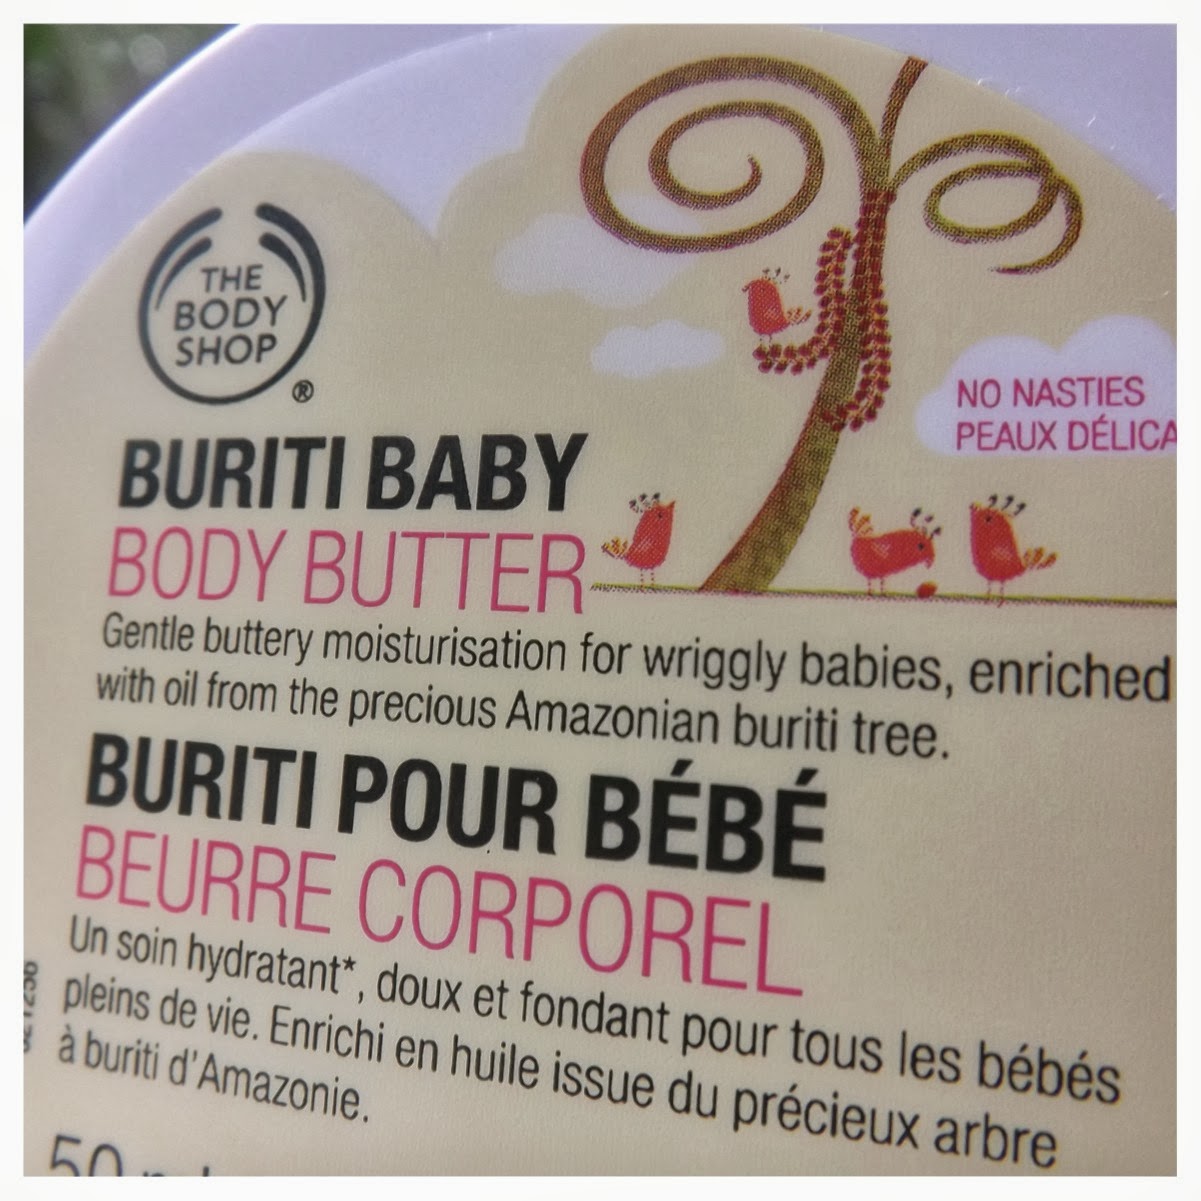 Your Average: The Body Shop Butter